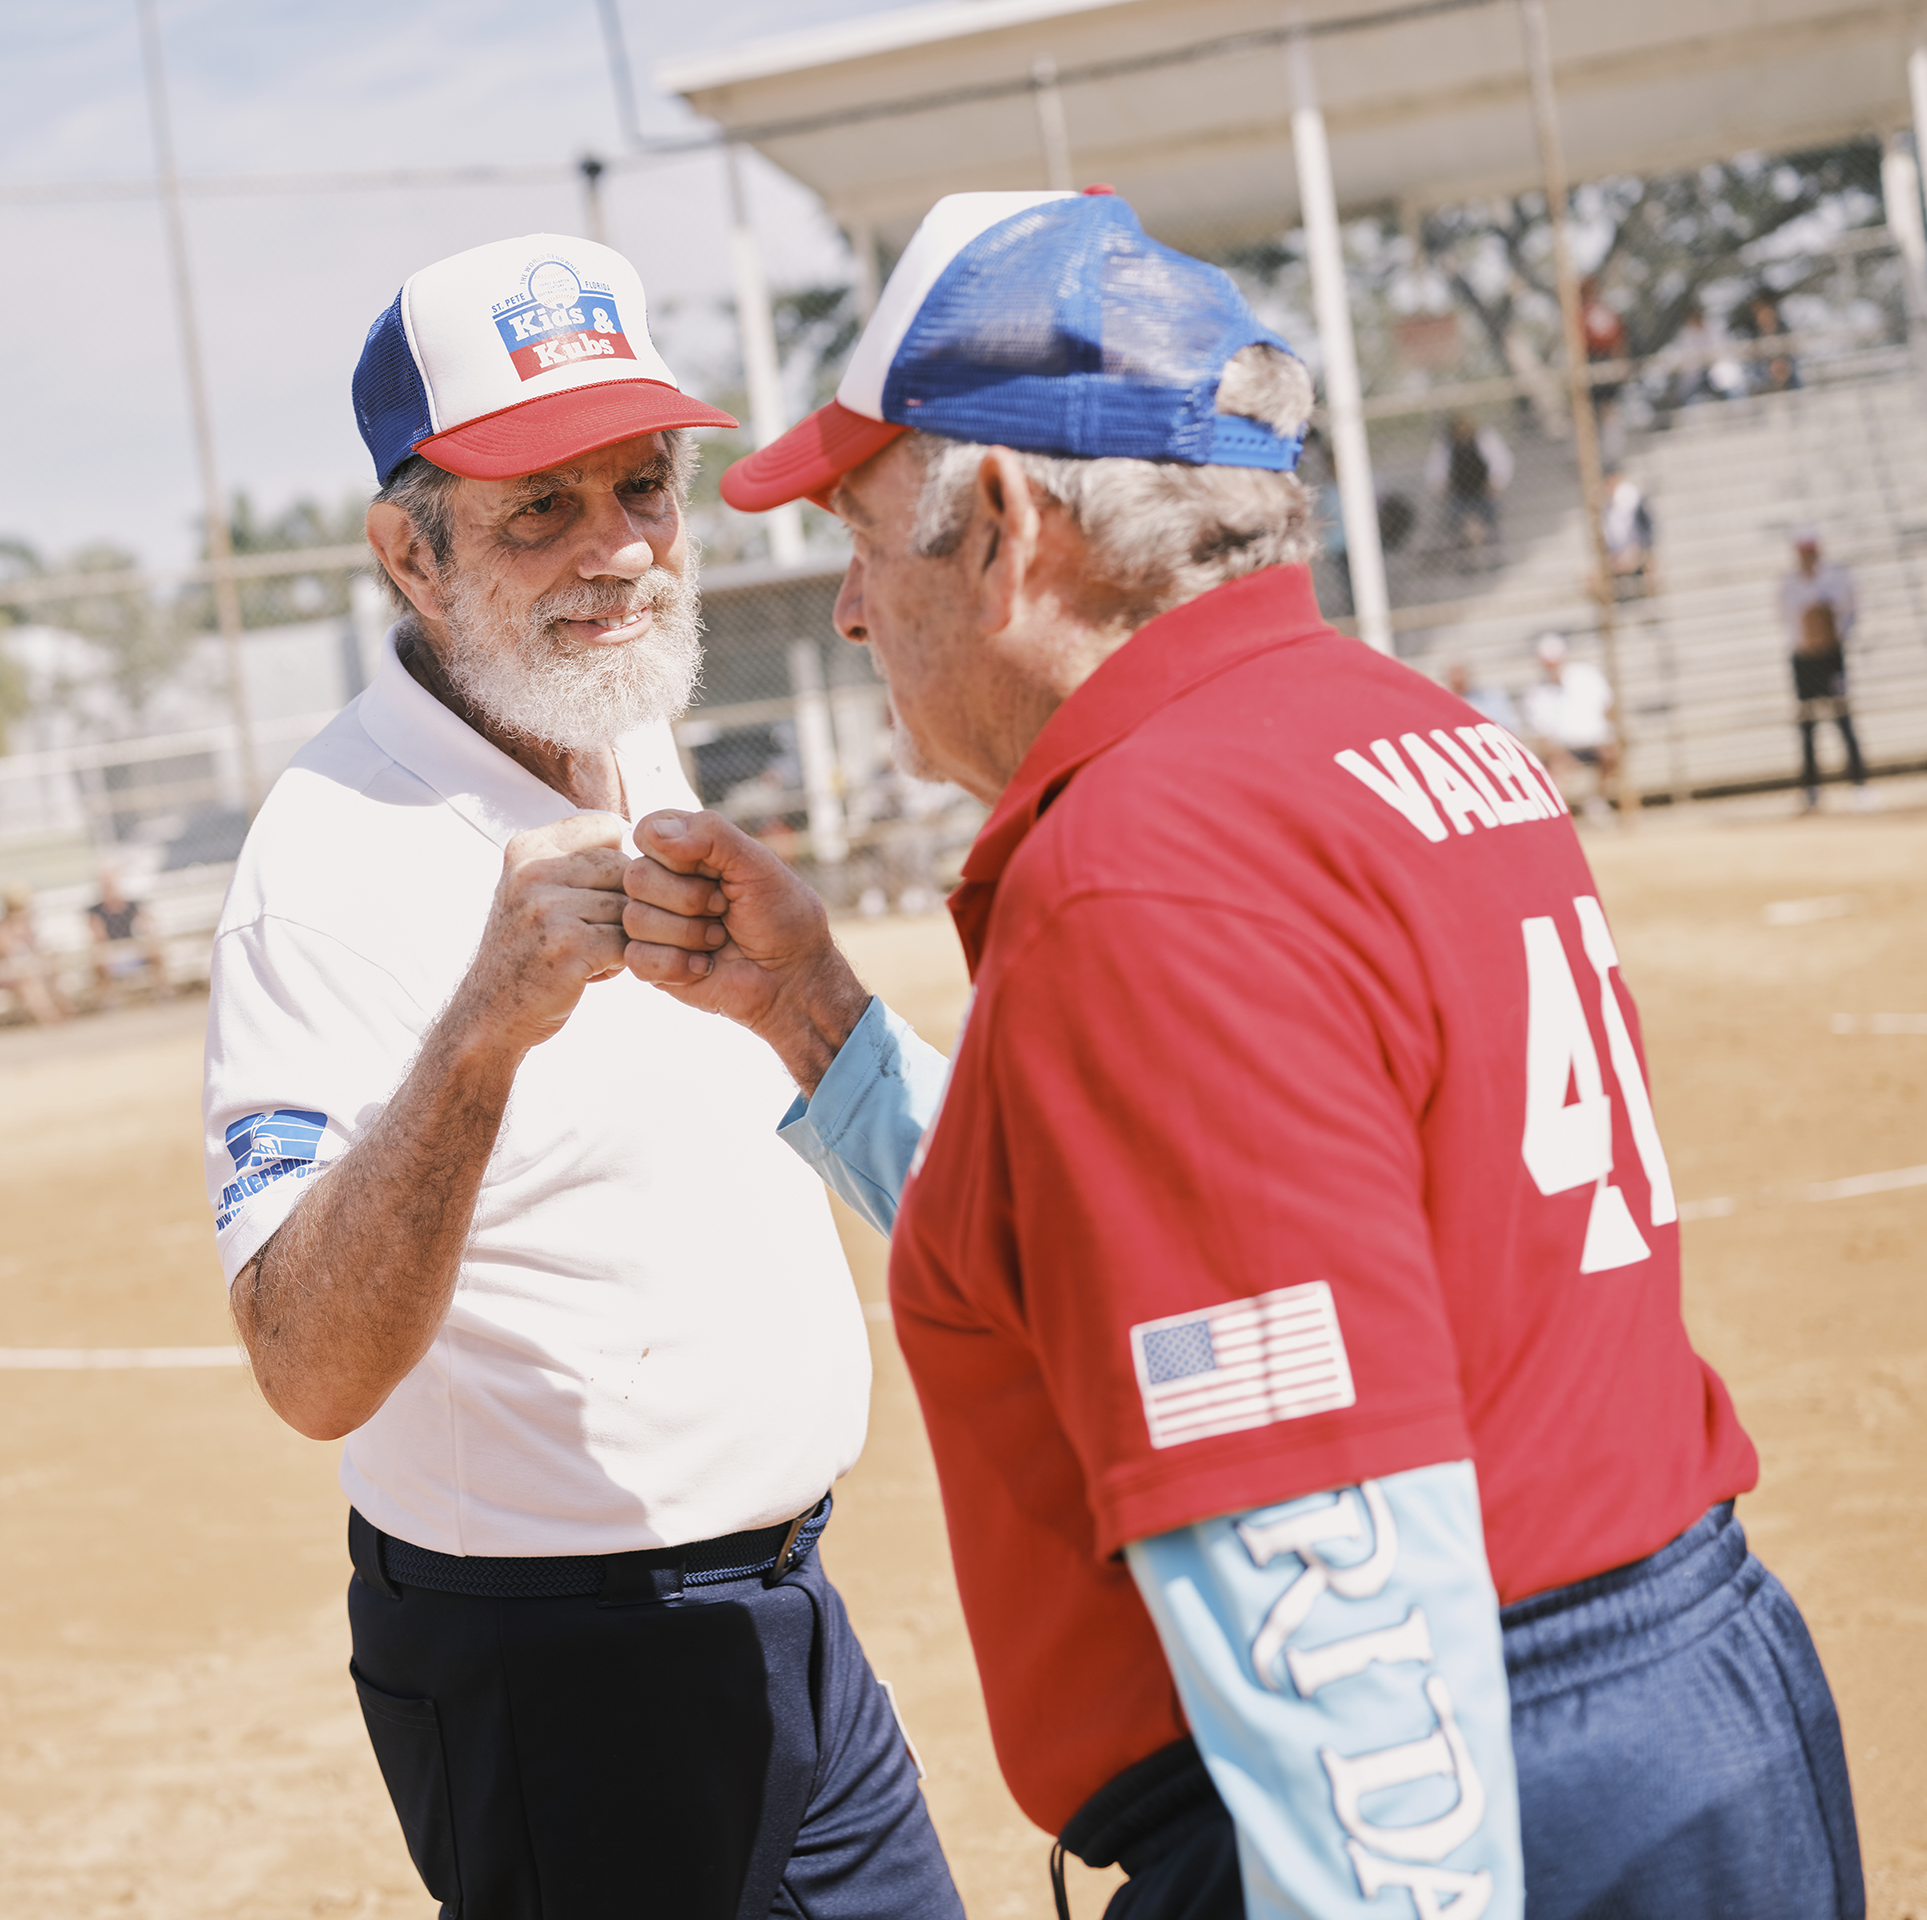 john draeger gives a fist bump to his opponent after a game in the kids ’n kubs softball league on january 24, 2023 in st petersburg, floridazack wittman for men’s health